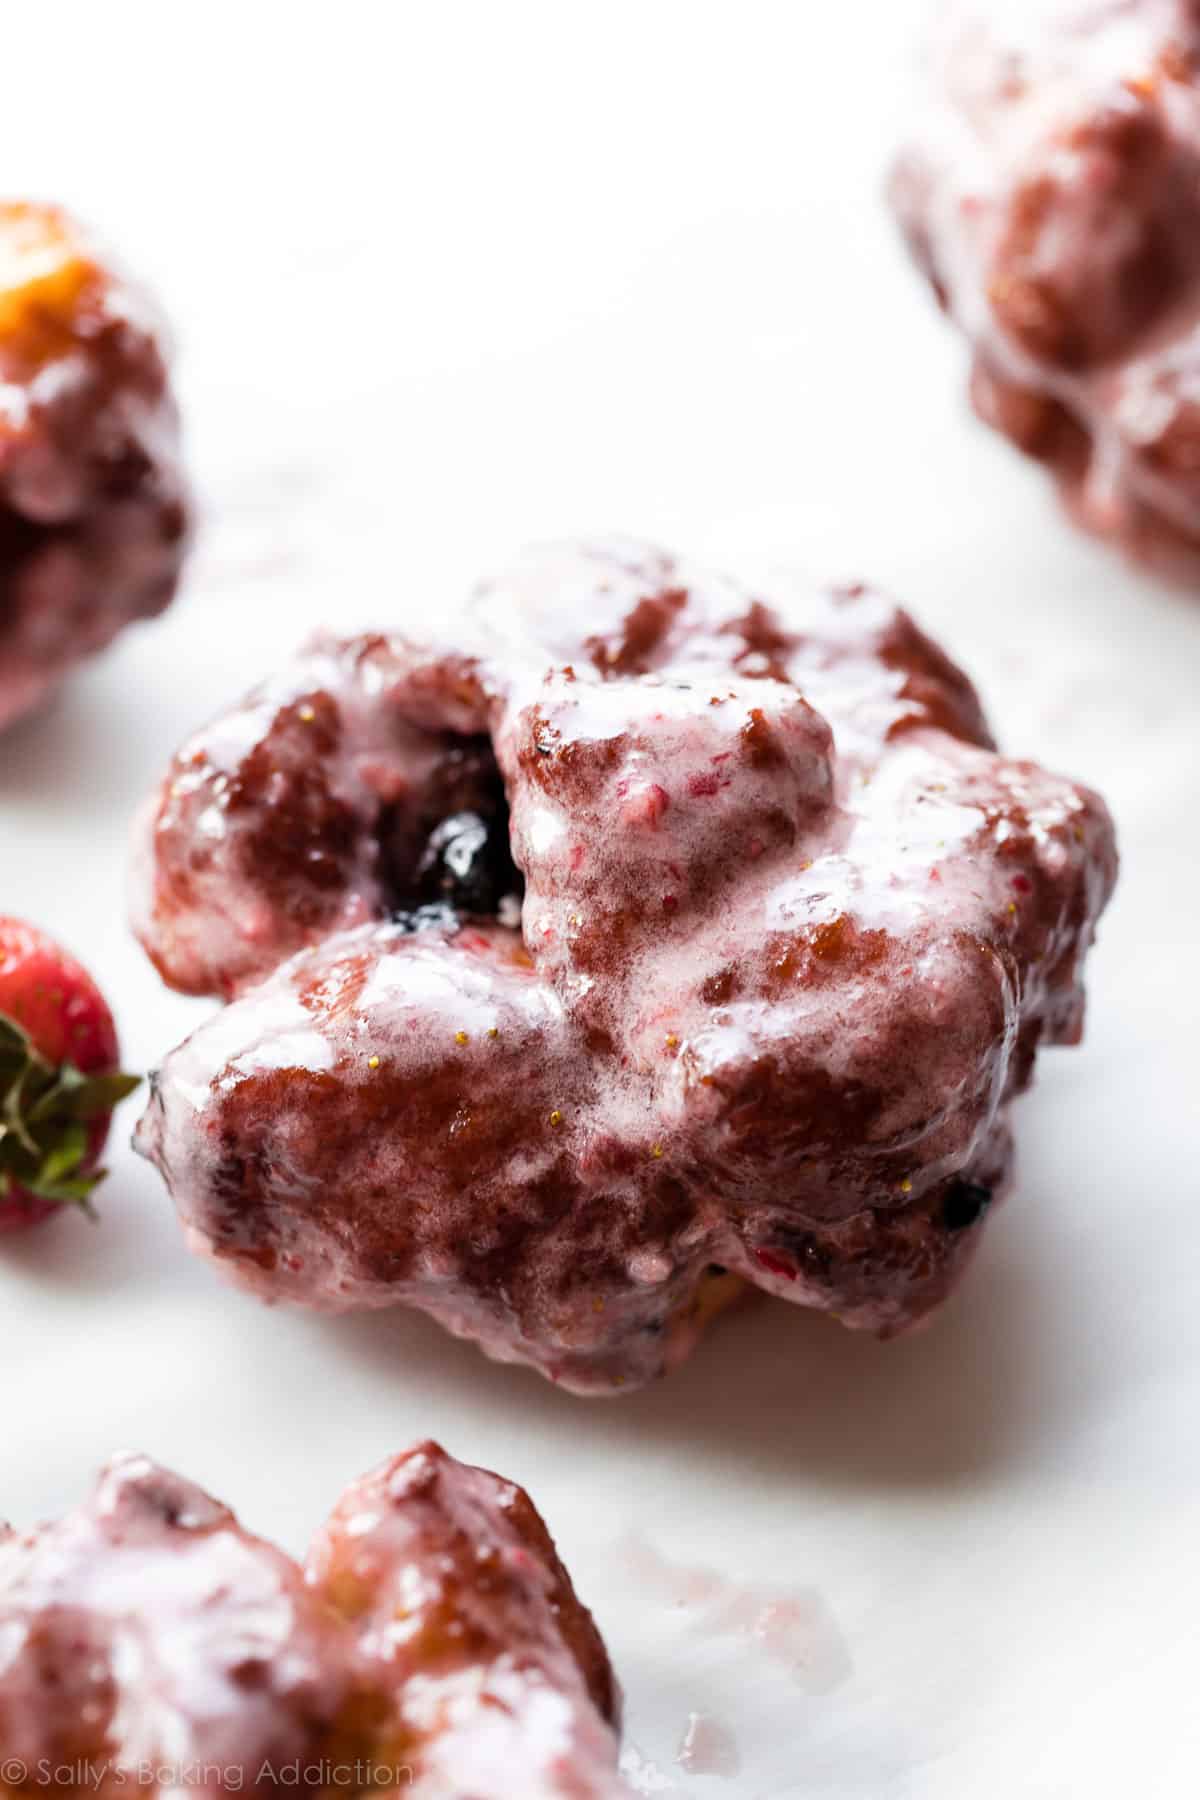 Blueberry fritters with strawberry glaze